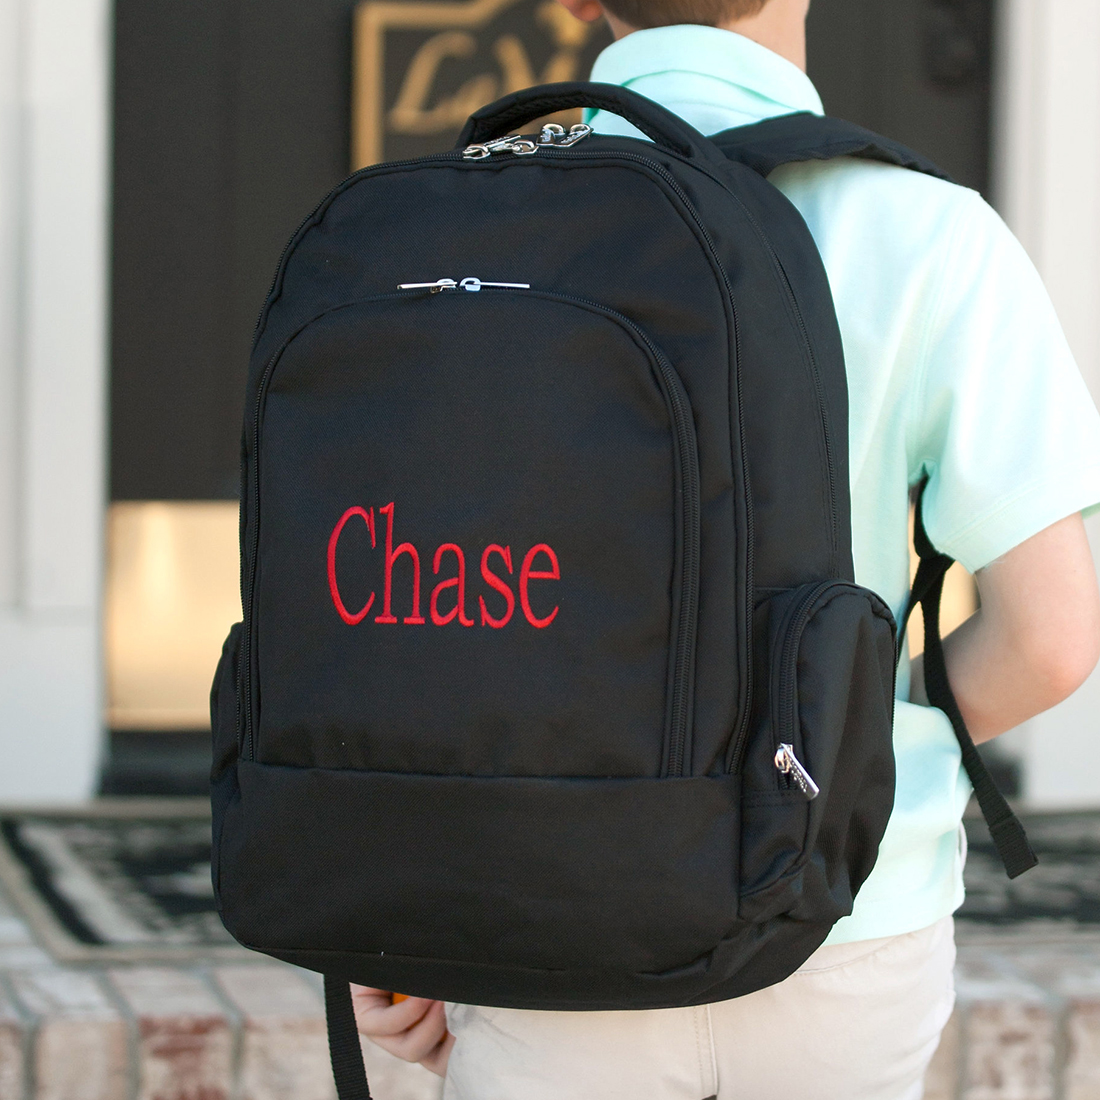 Personalized Backpacks for adults | Monogram Backpacks for Boys